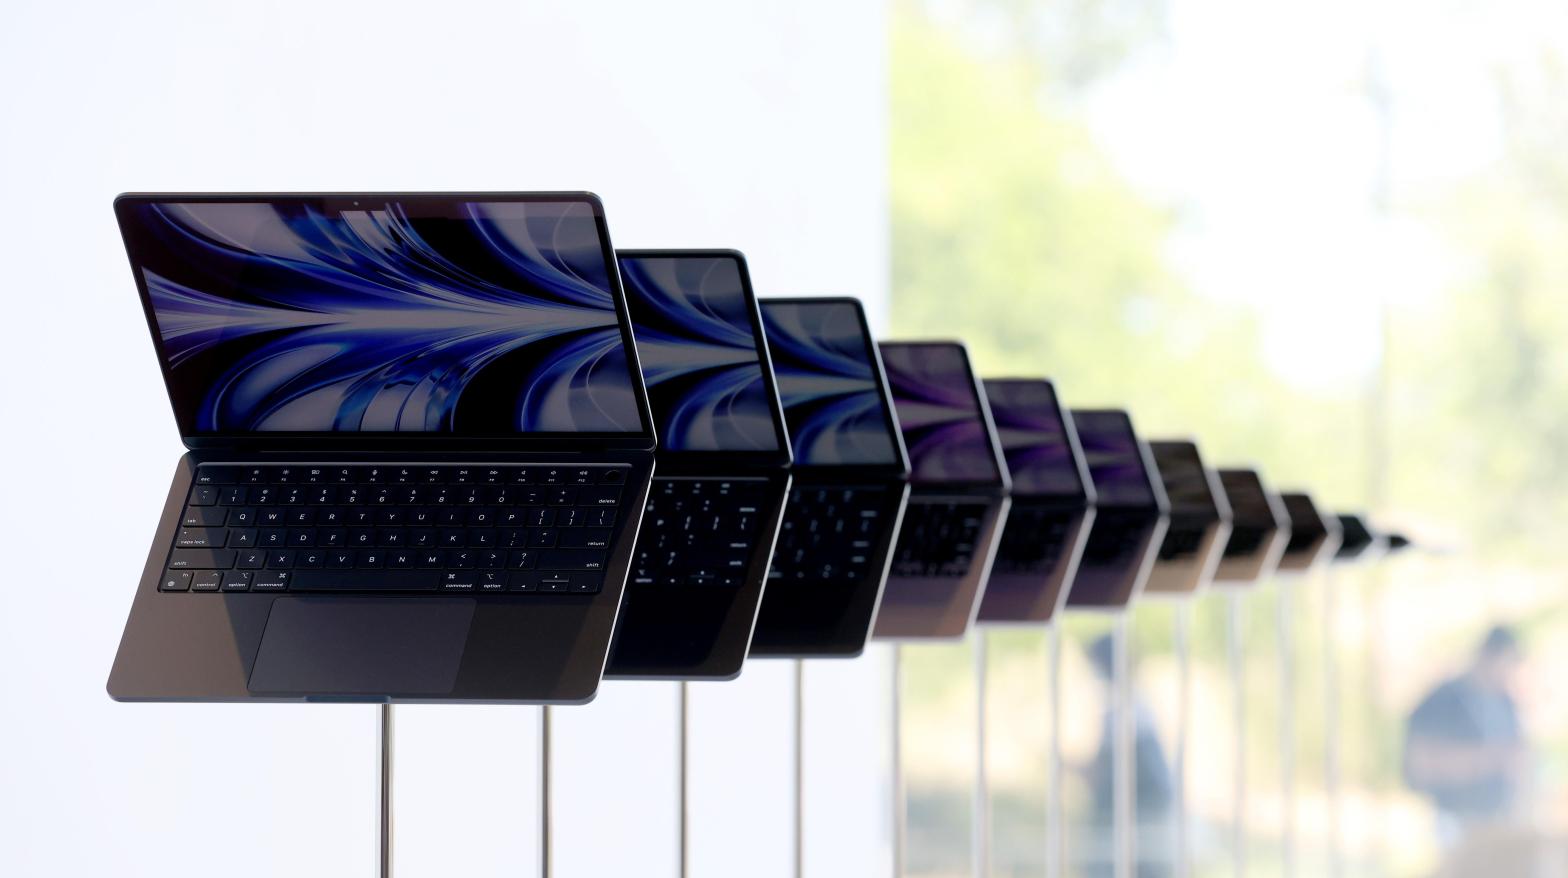 Macbook Pros and Airs from 2018 to 2020, as well as 2020 iMacs, contain the T2 chip. (Image: Justin Sullivan, Getty Images)